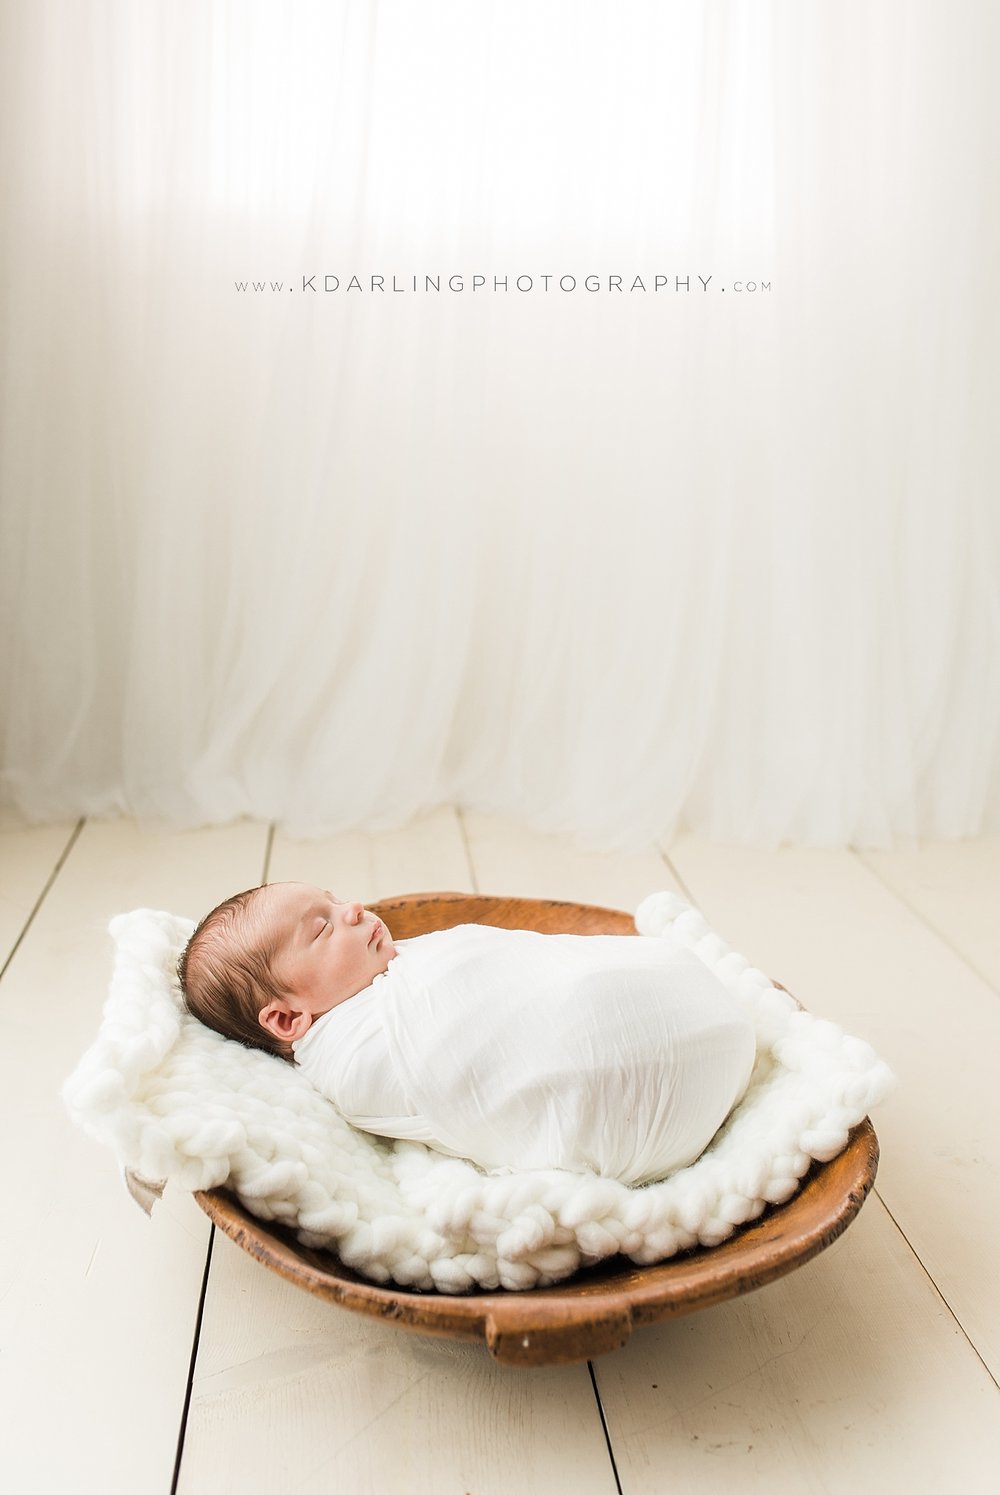 Newborn baby wrapped in white on wood floor